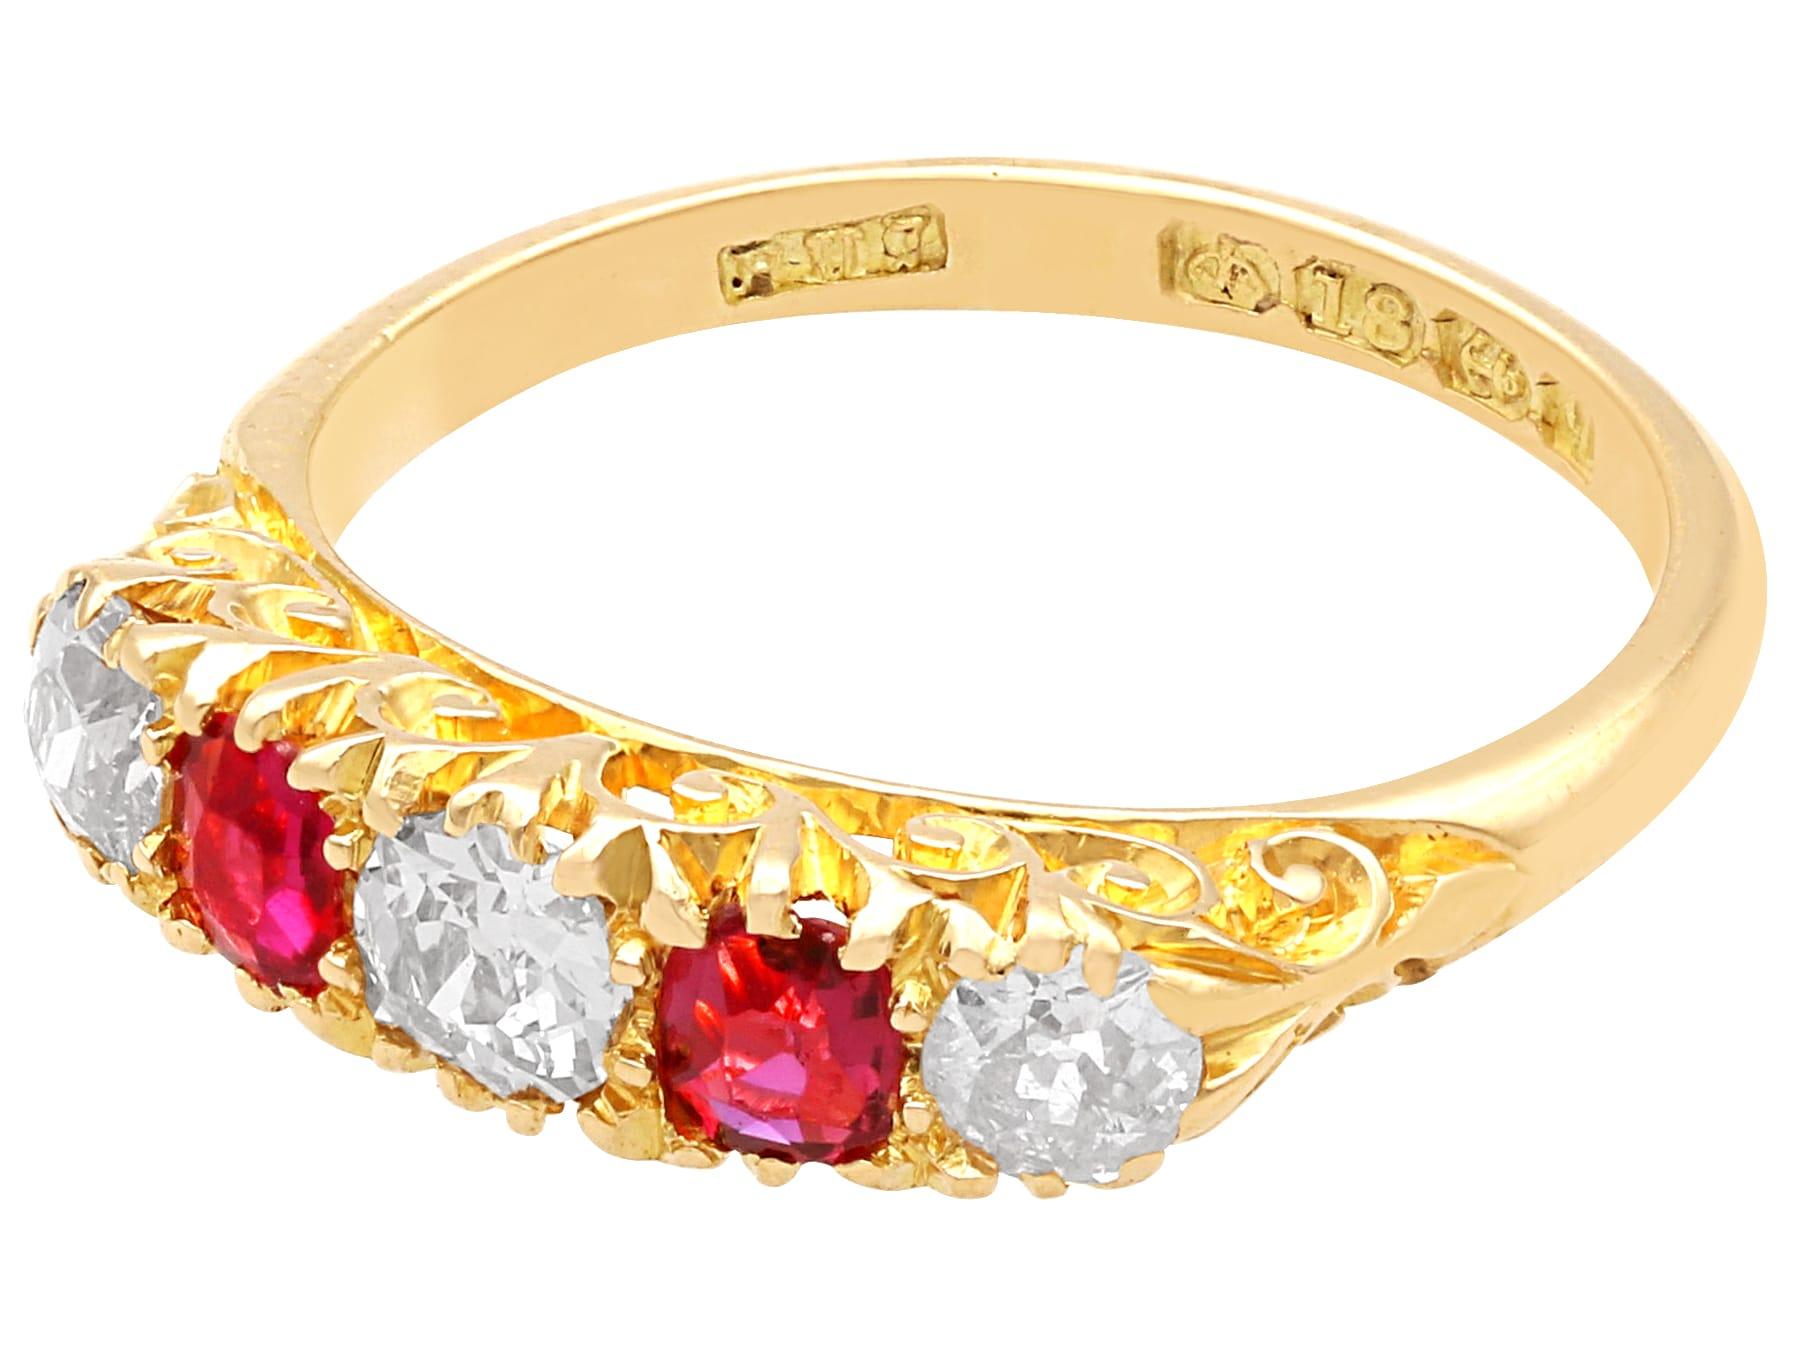 A fine and impressive antique 0.45 carat ruby and 0.60 carat diamond, 18 karat yellow gold five stone ring; part of our antique ruby jewellery collections.

This fine and impressive ruby and diamond ring has been crafted in 18k yellow gold.

The